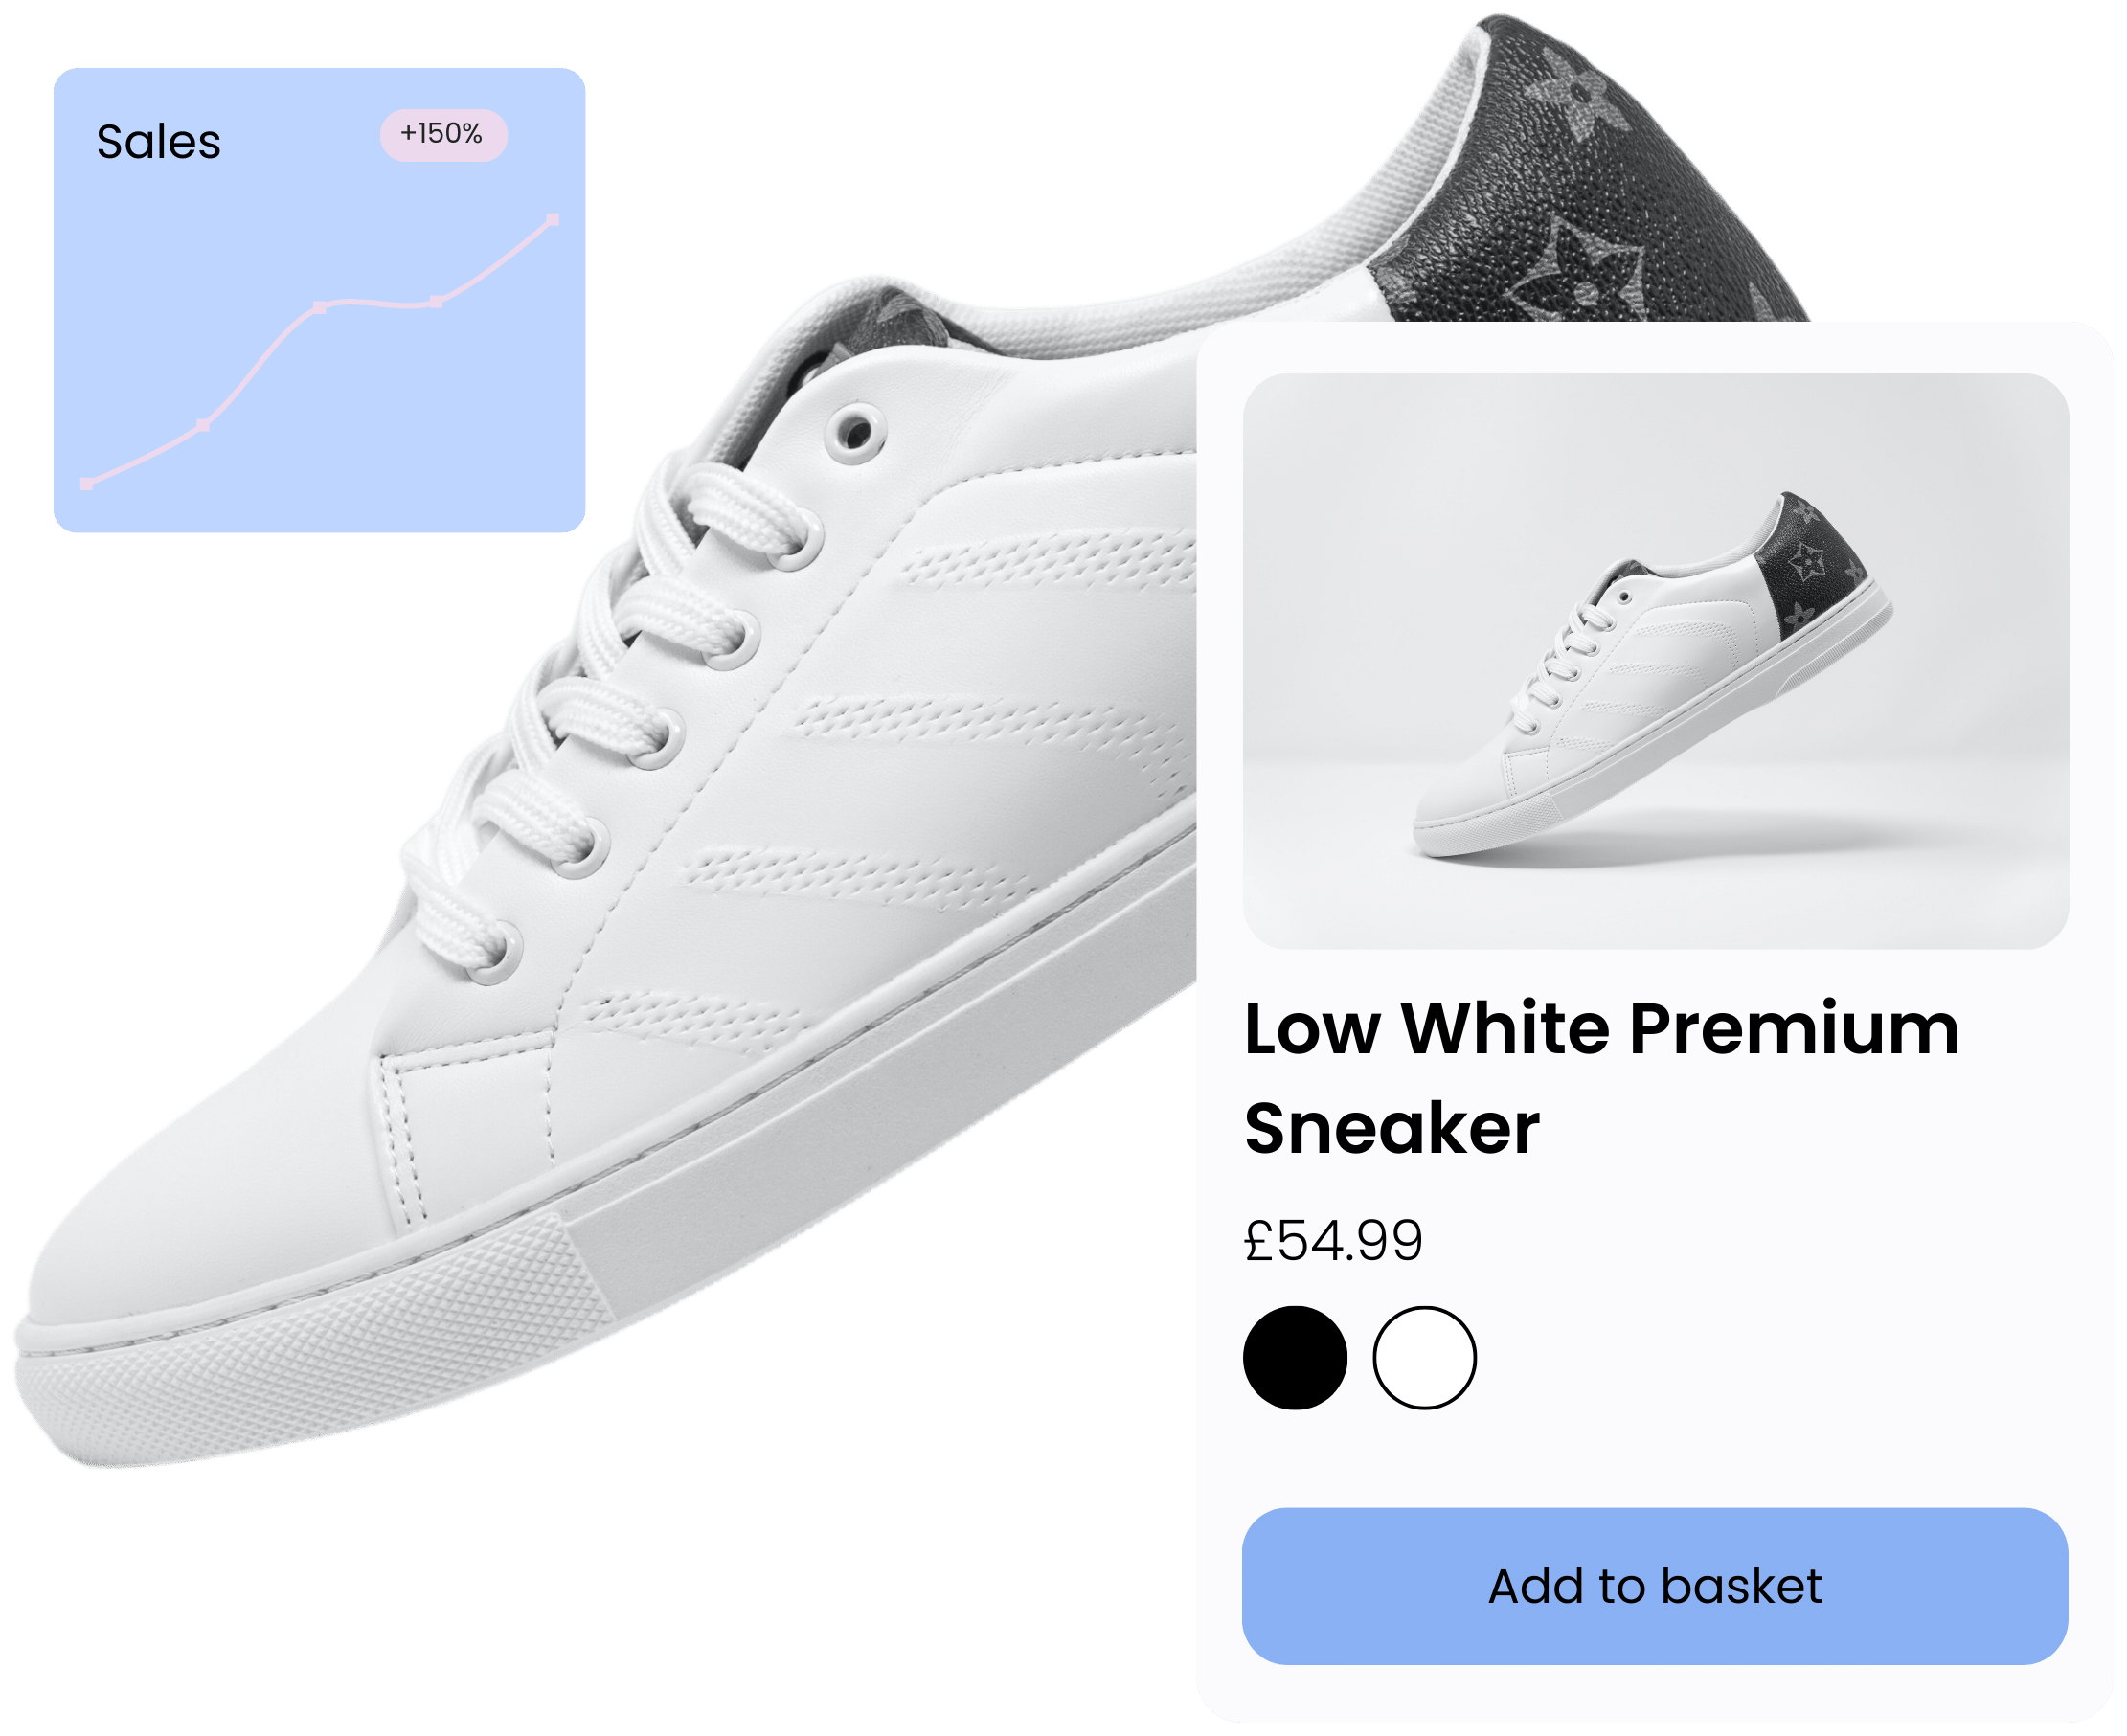 Online store experience selling sneakers with variation options